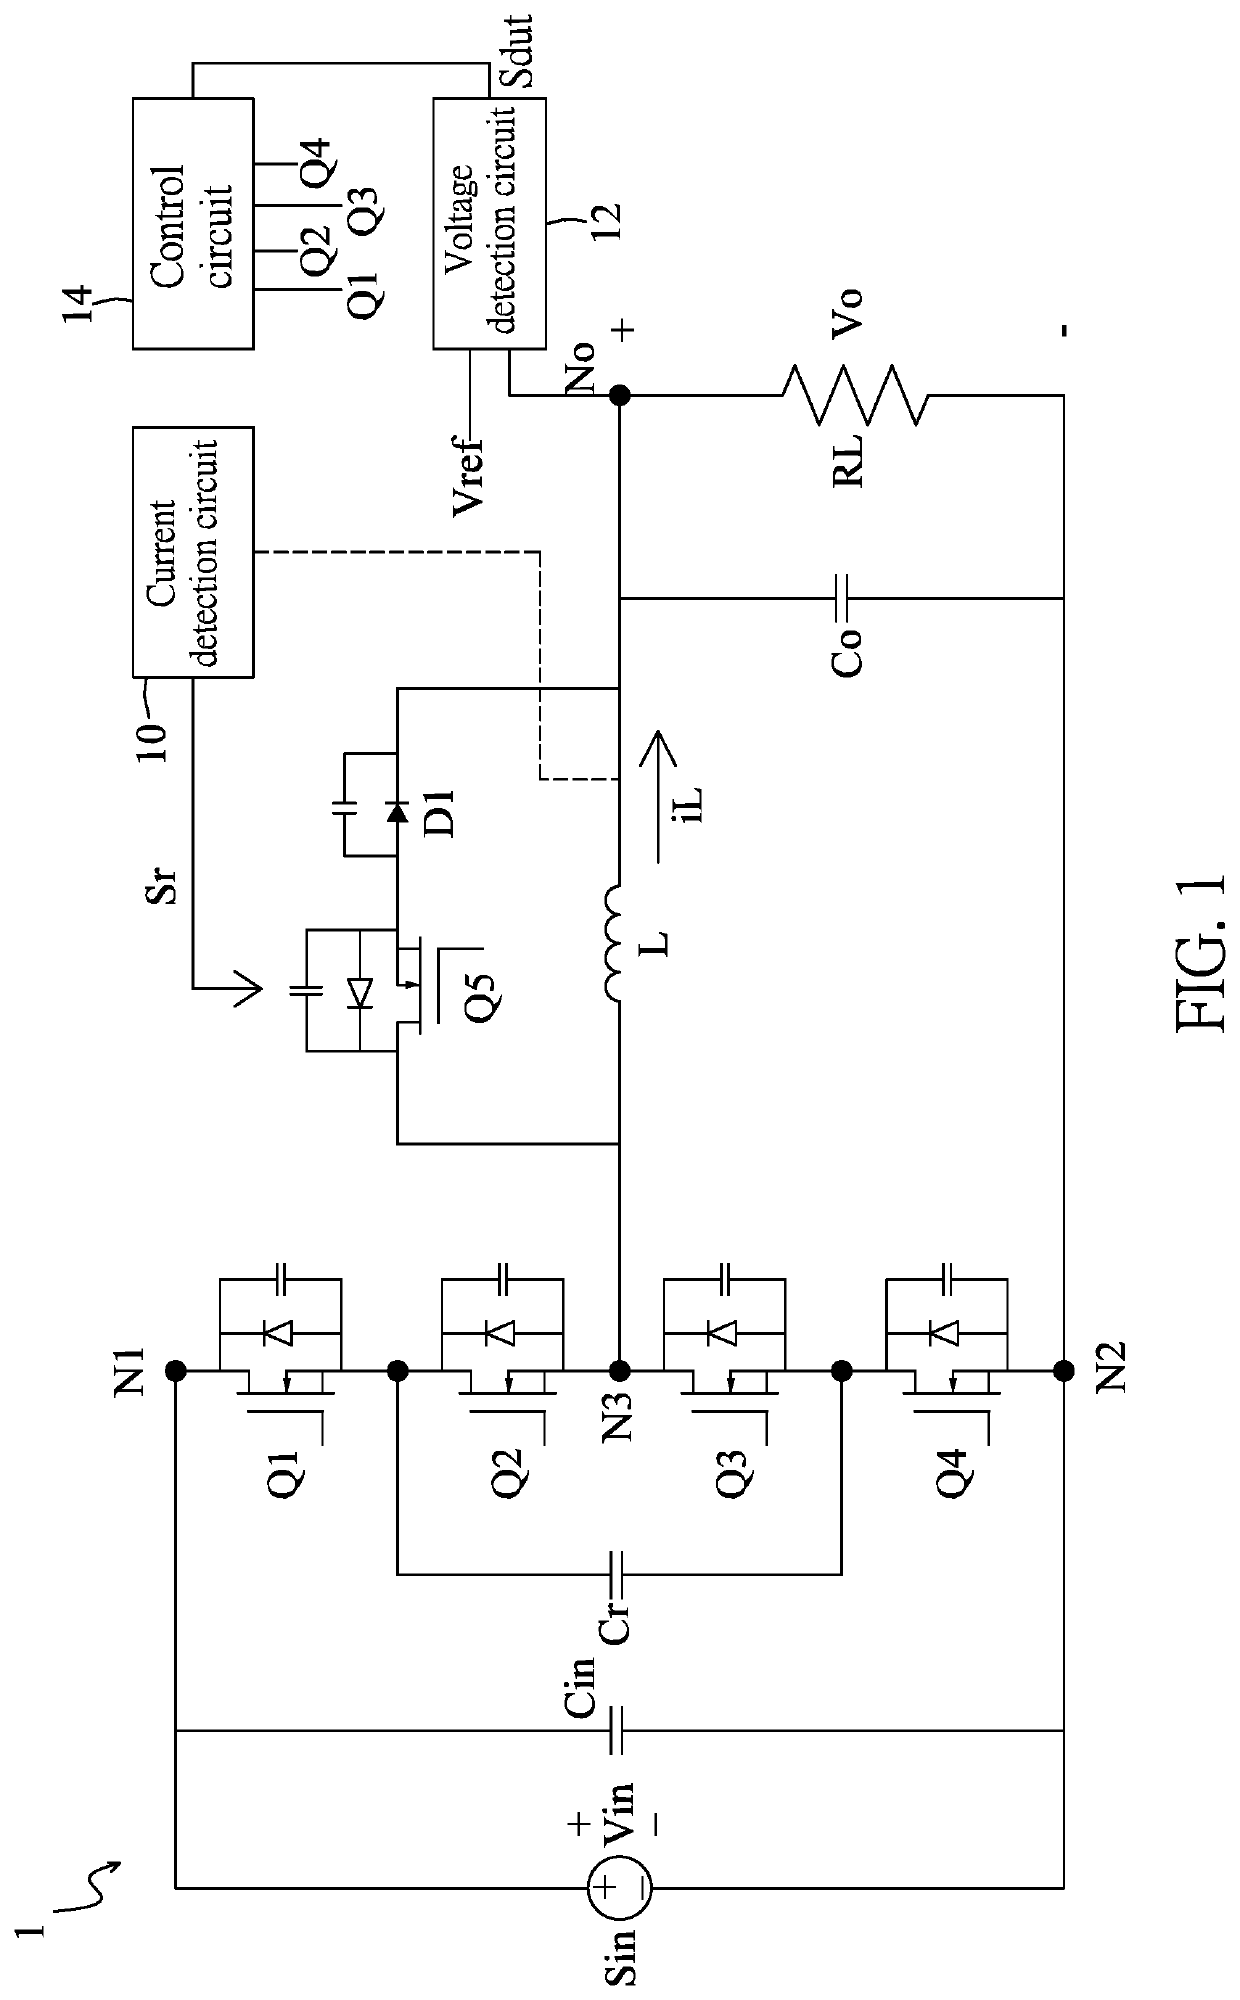 Multi-level buck converter capable of reducing component stress